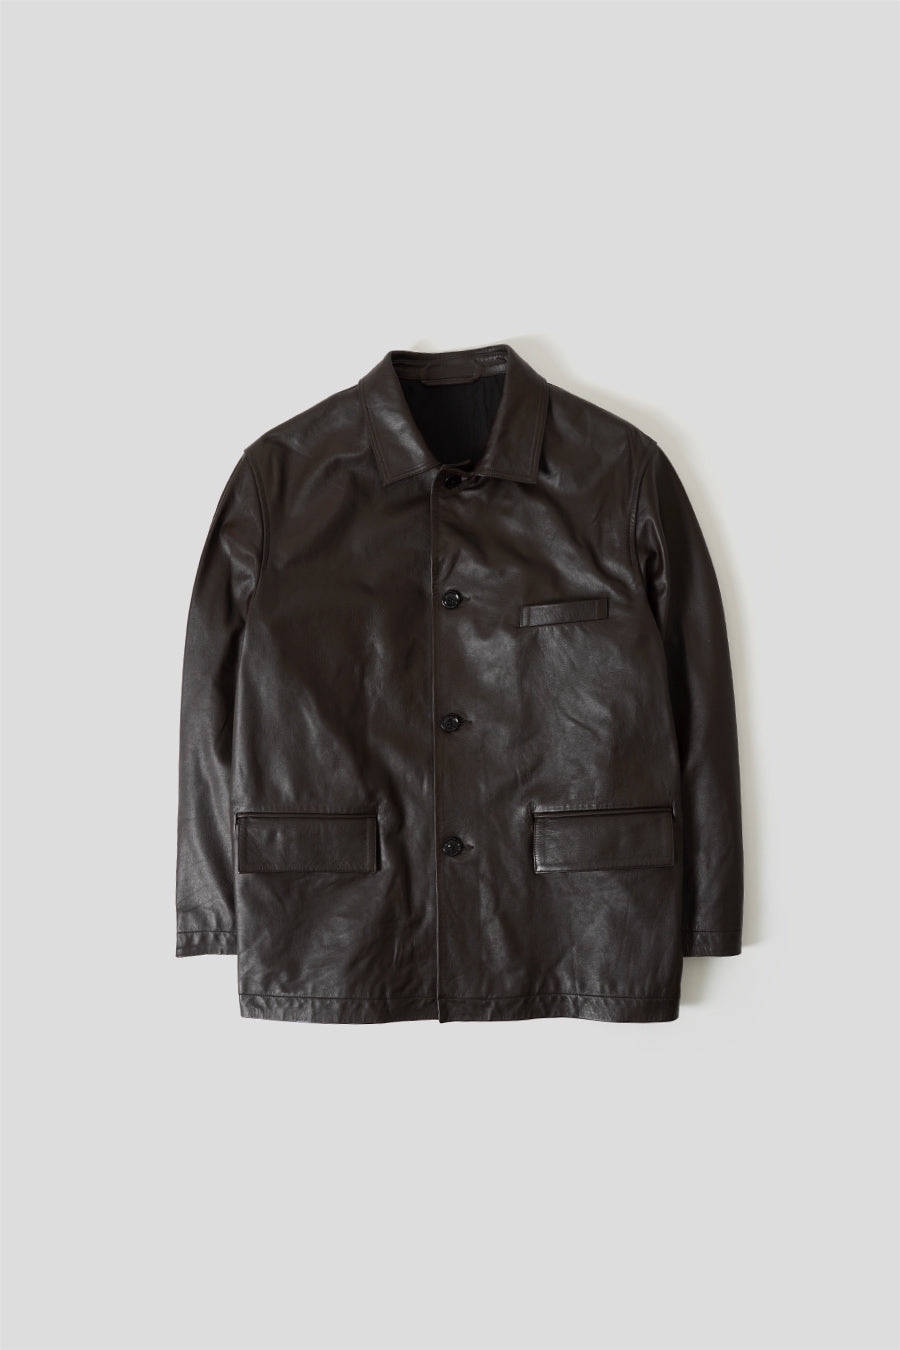 LEMAIRE - BROWN RELAXED LEATHER JACKET  - LE LABO STORE